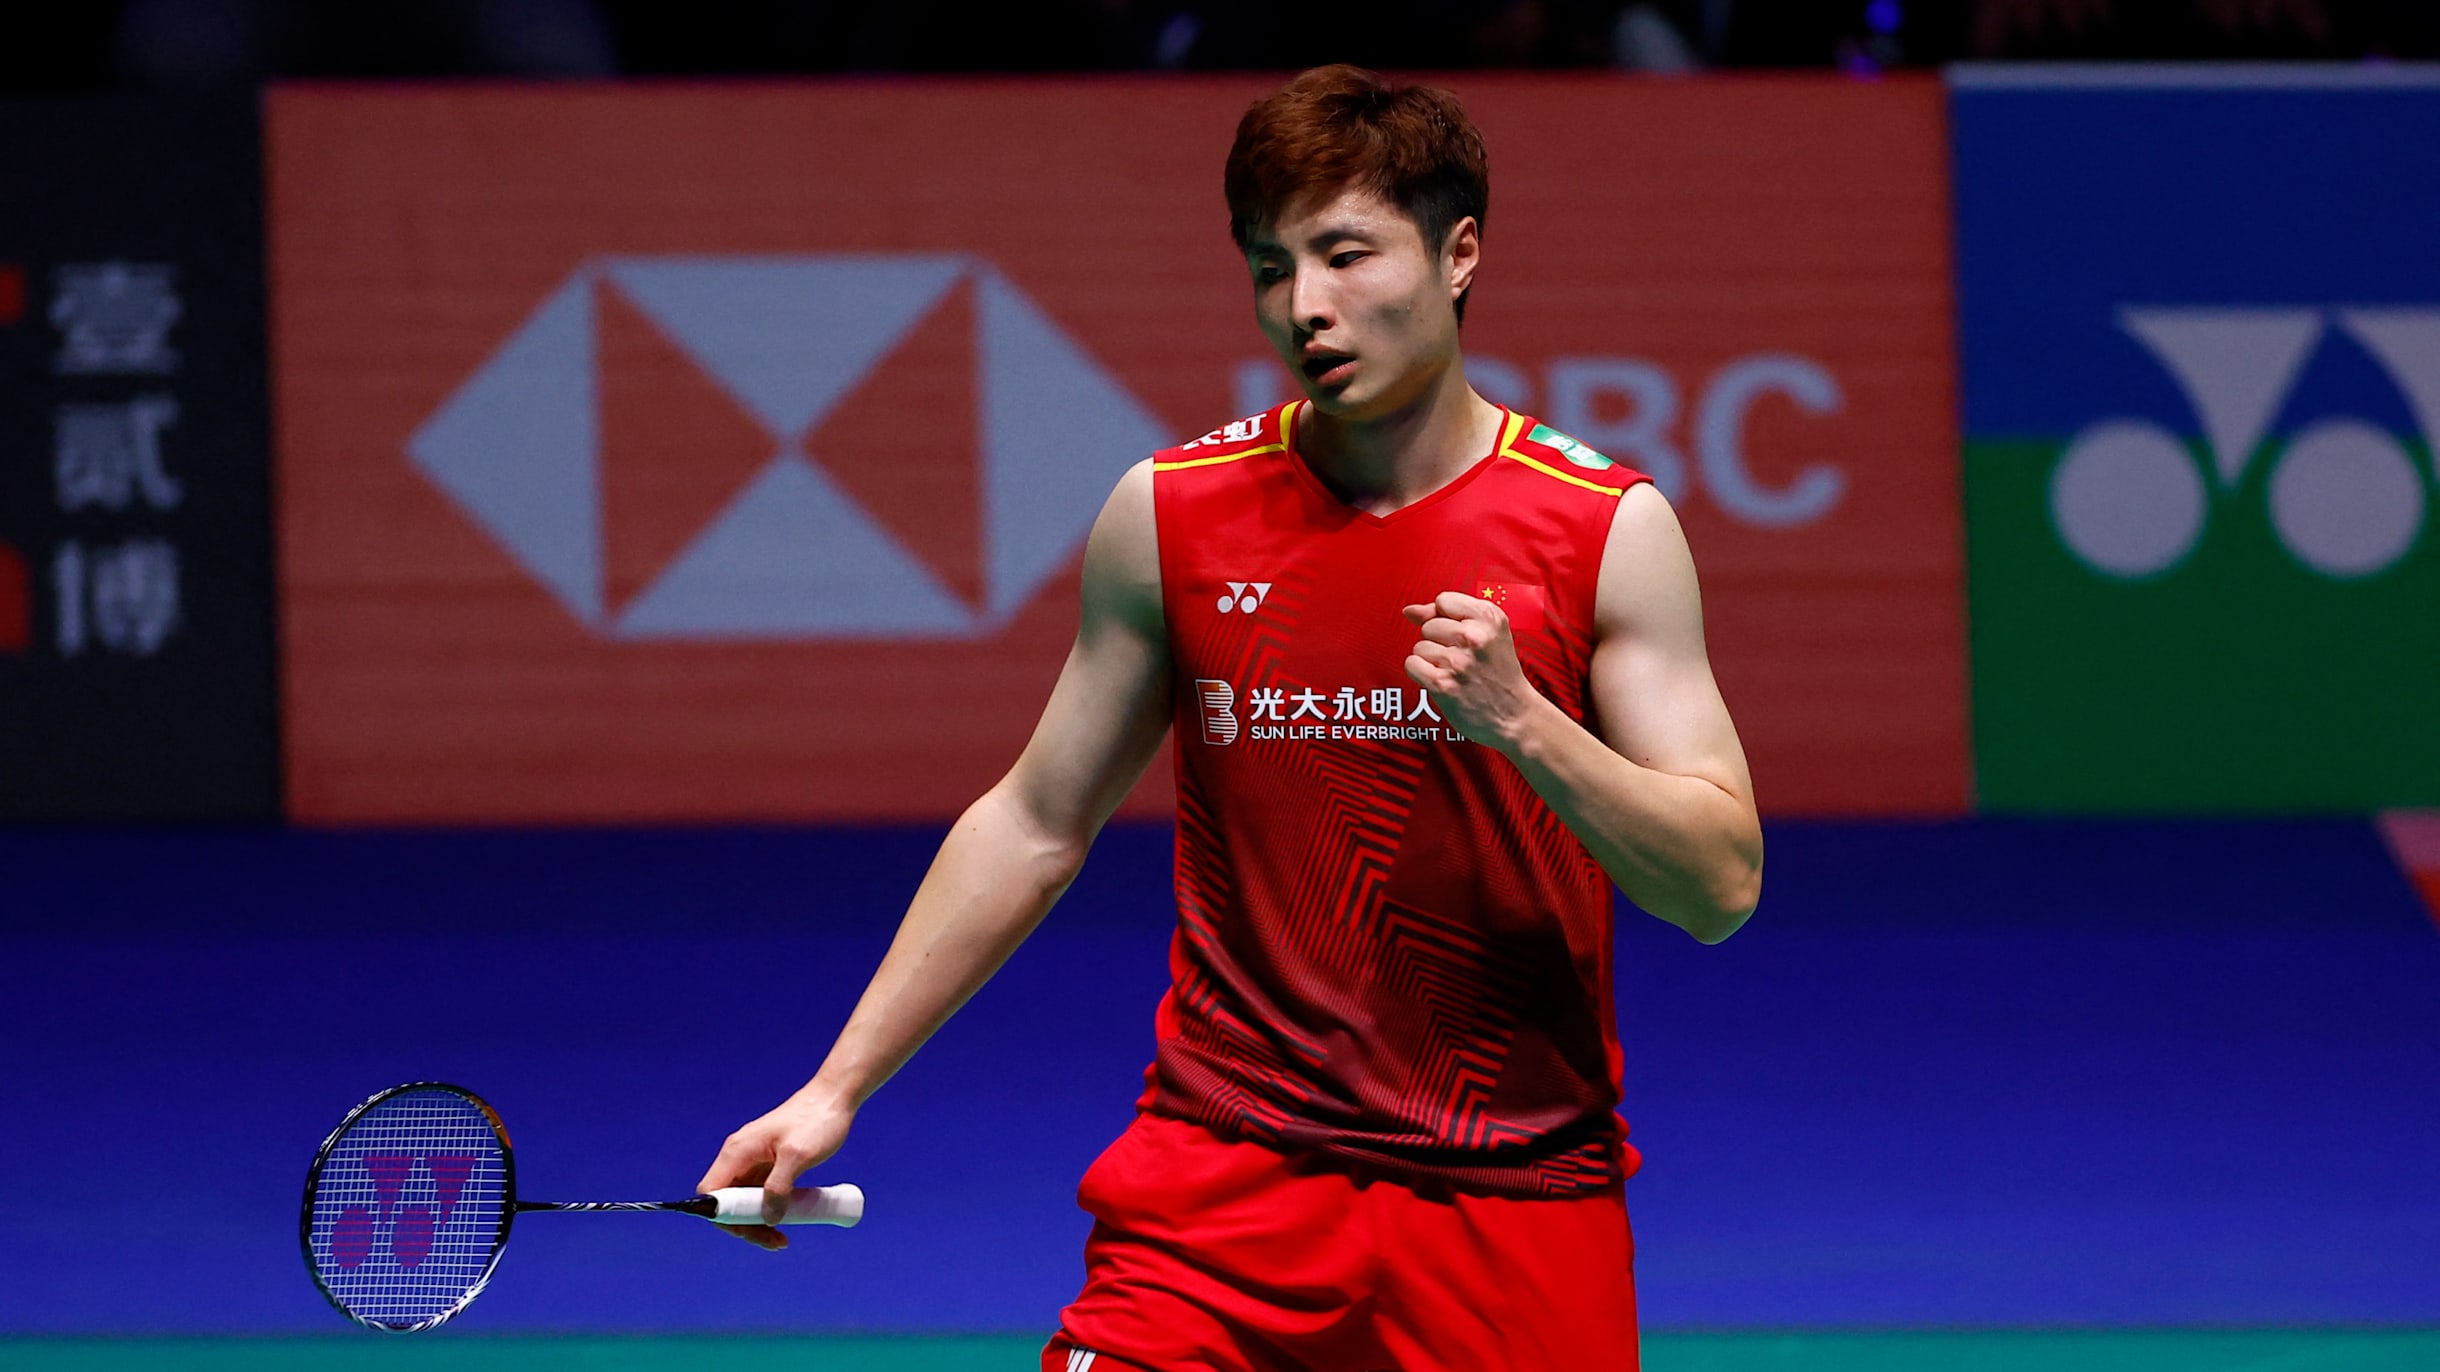 All England Open 2023 Badminton Semi-final results as Lee Zii Jia exits and An Se-young wins epic